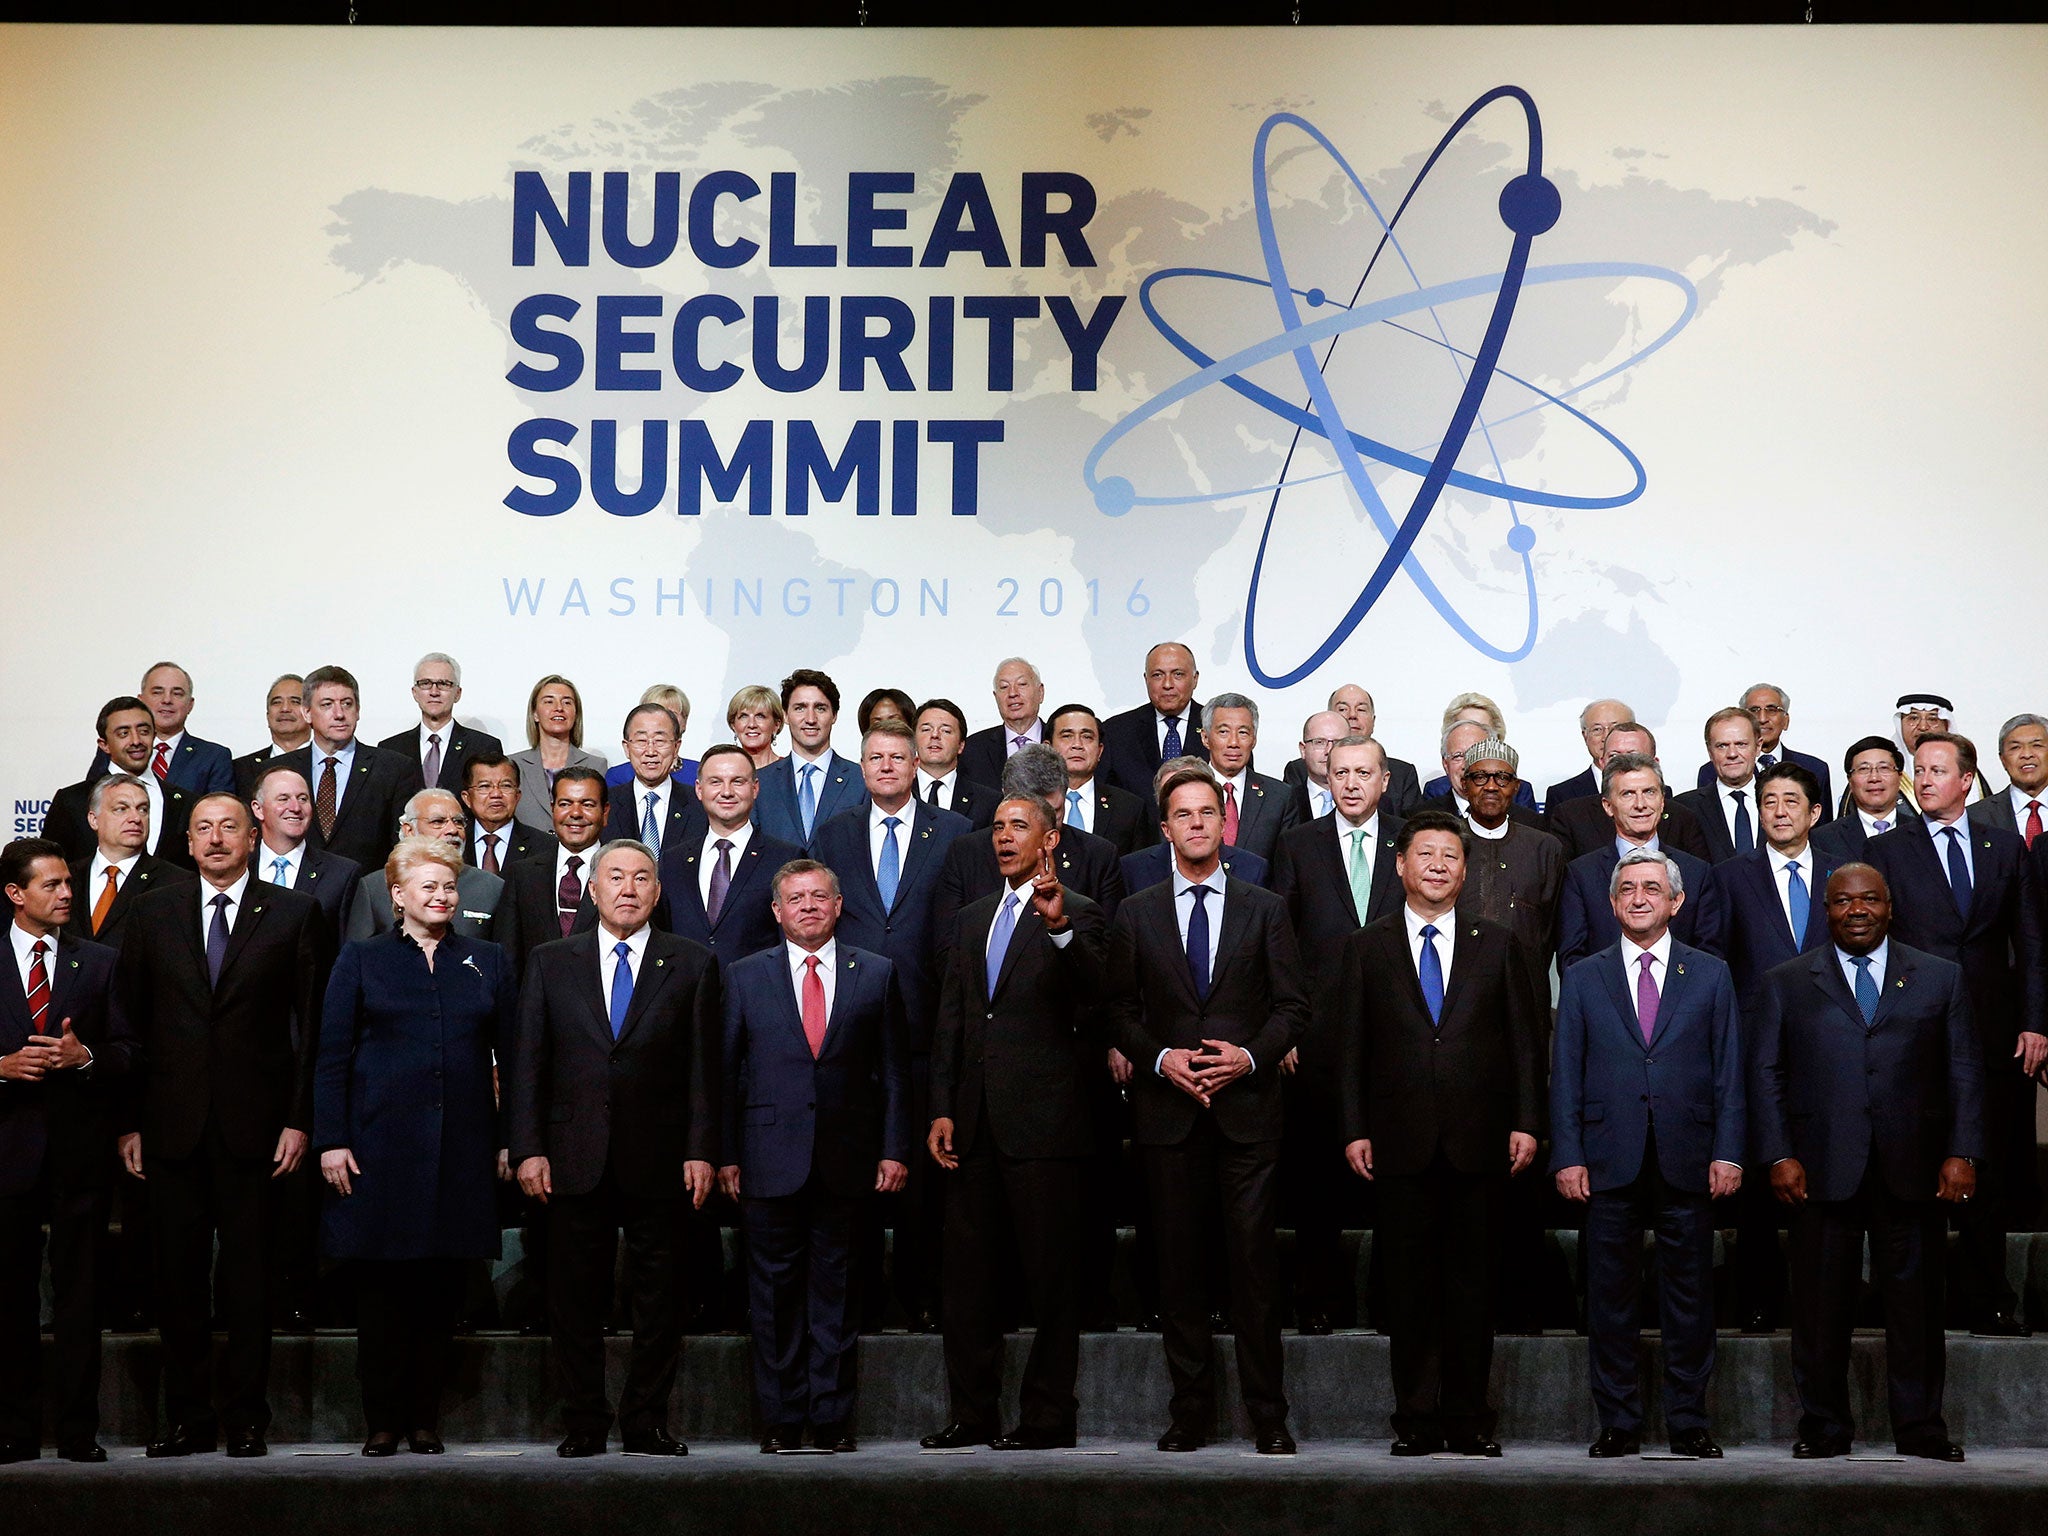 World leaders gather for a 'team photo' during a nuclear summit in Washington, DC, on 1 April, 2016